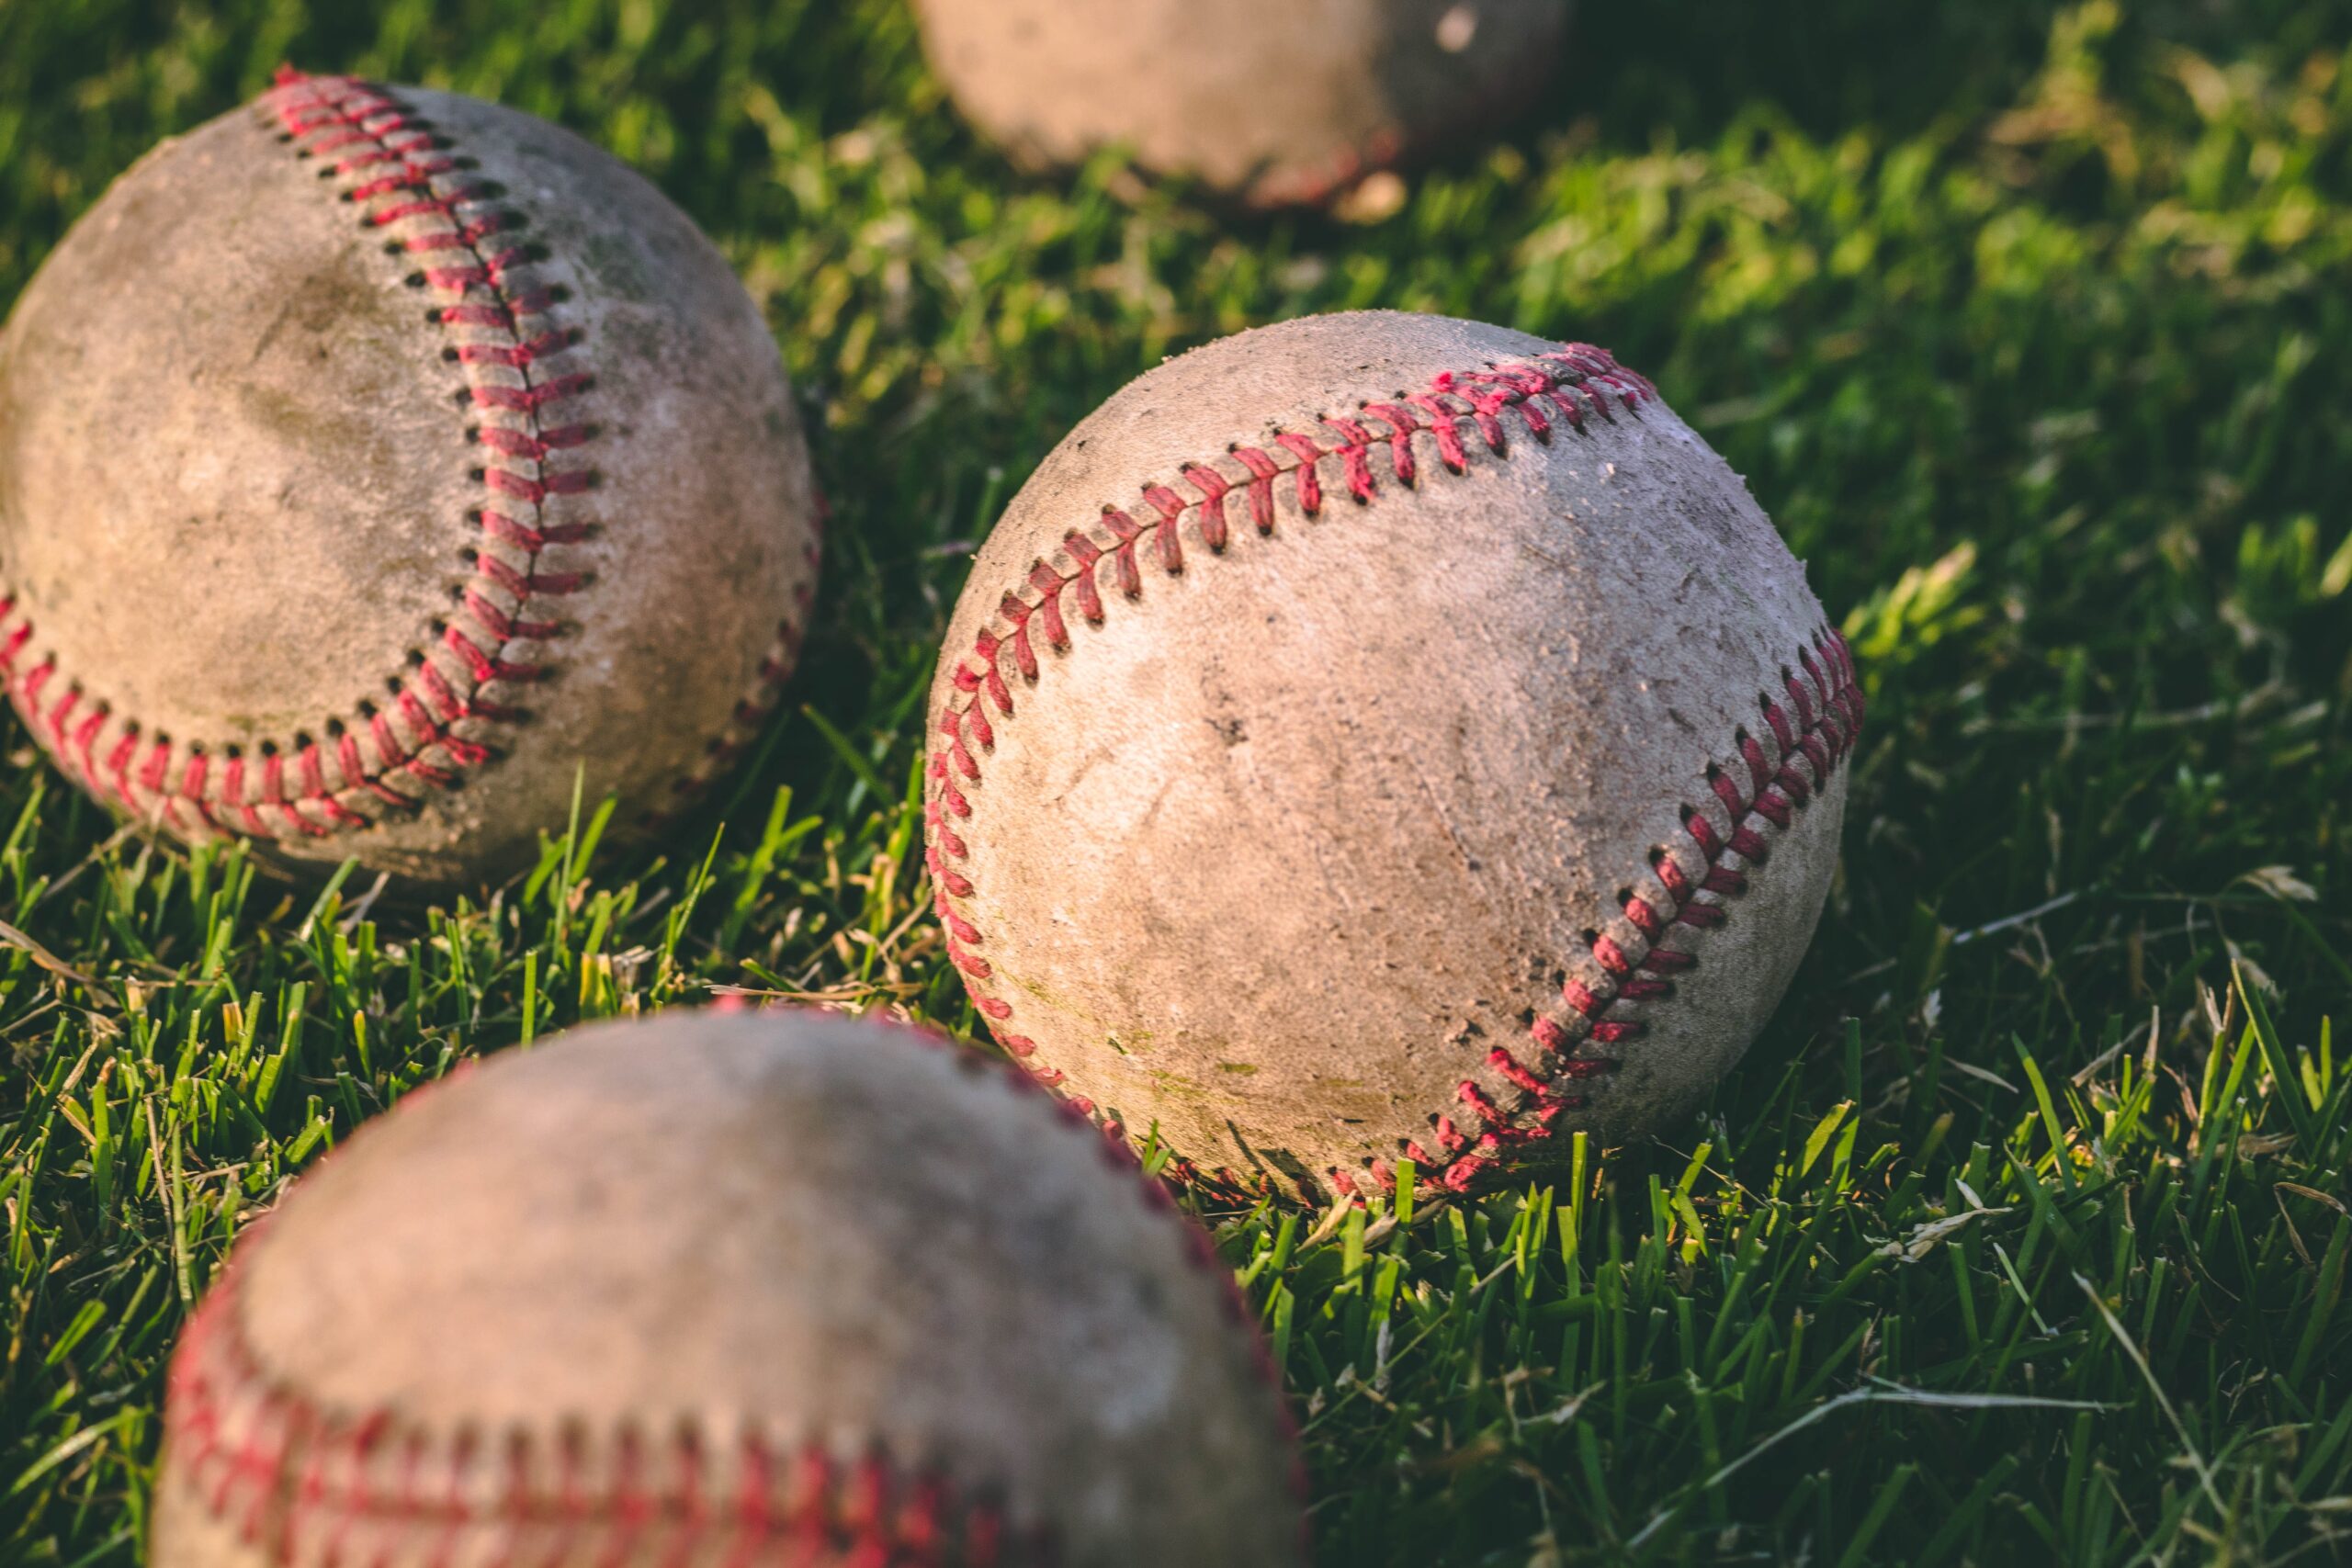 close-up-photography-of-four-baseballs-on-green-lawn-grasses